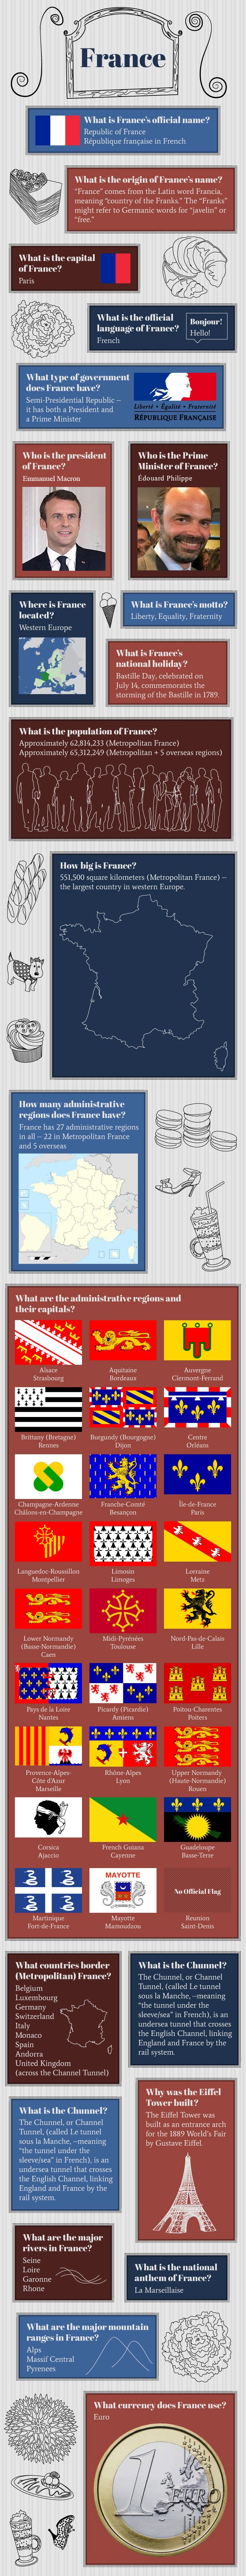 France Facts Infographic